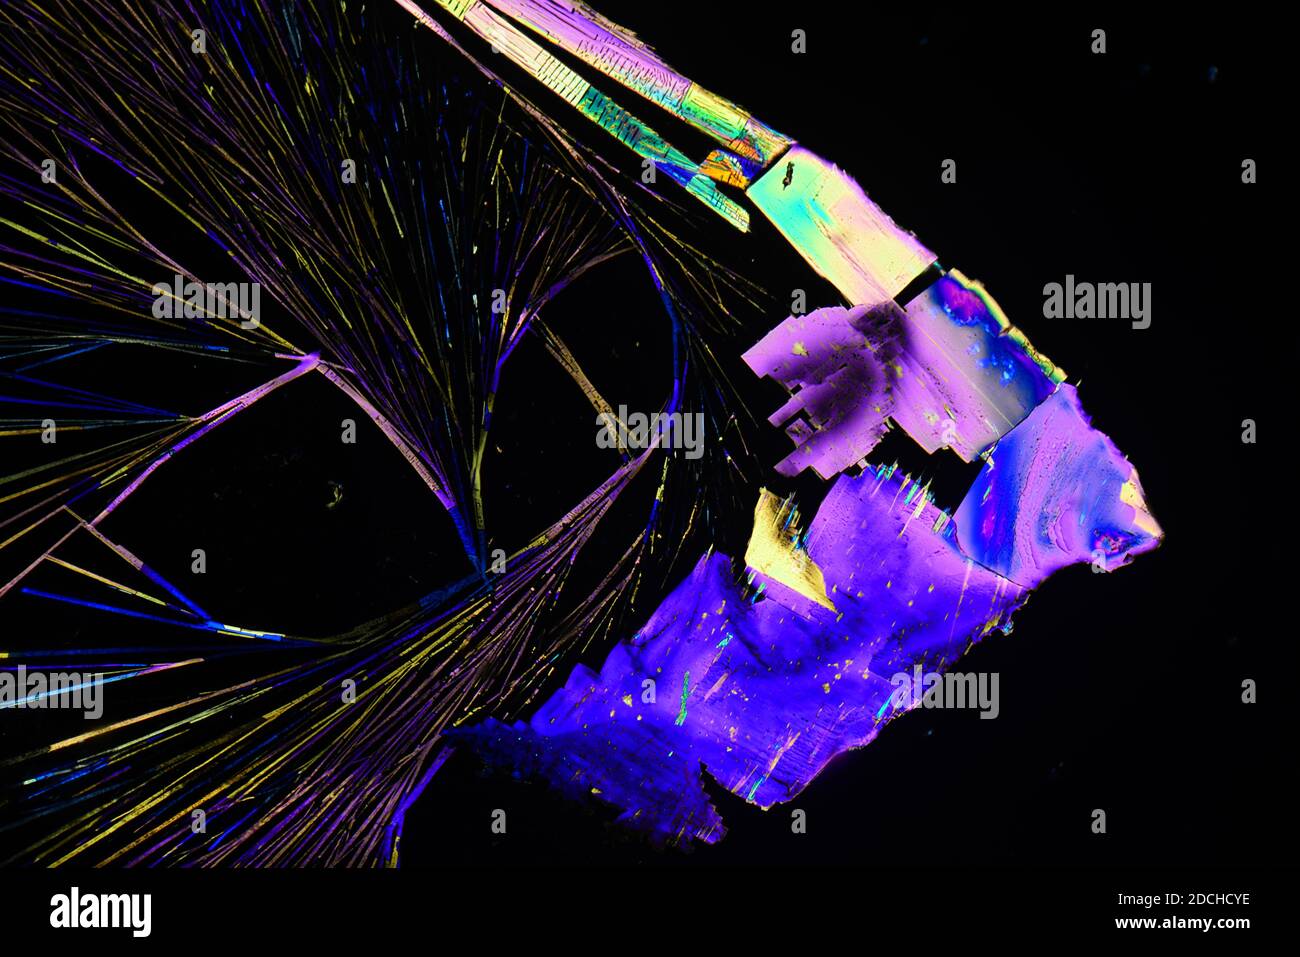 Crystals of Platino Cyanide of Strontium under microscope with polarized light. Stock Photo